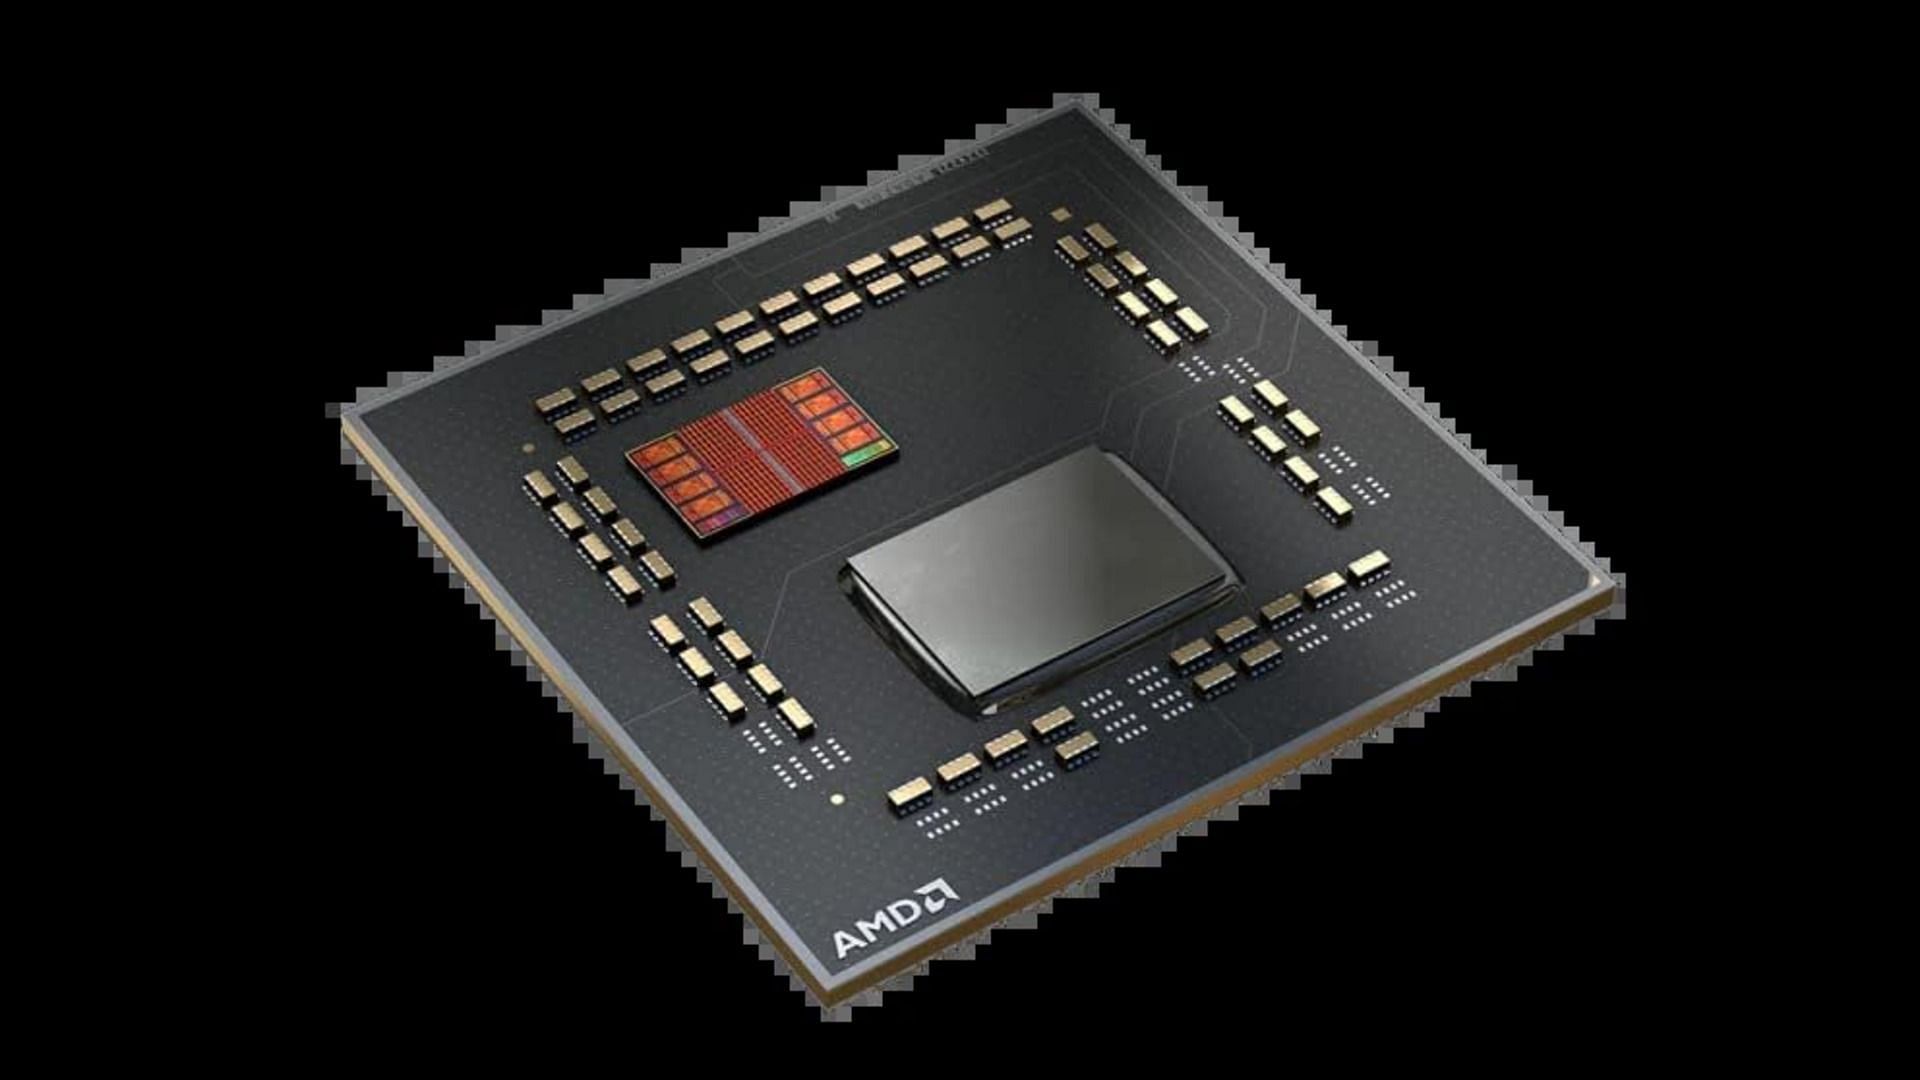 The internal representation of the AMD Ryzen 7 5800X3D (Image by AMD)